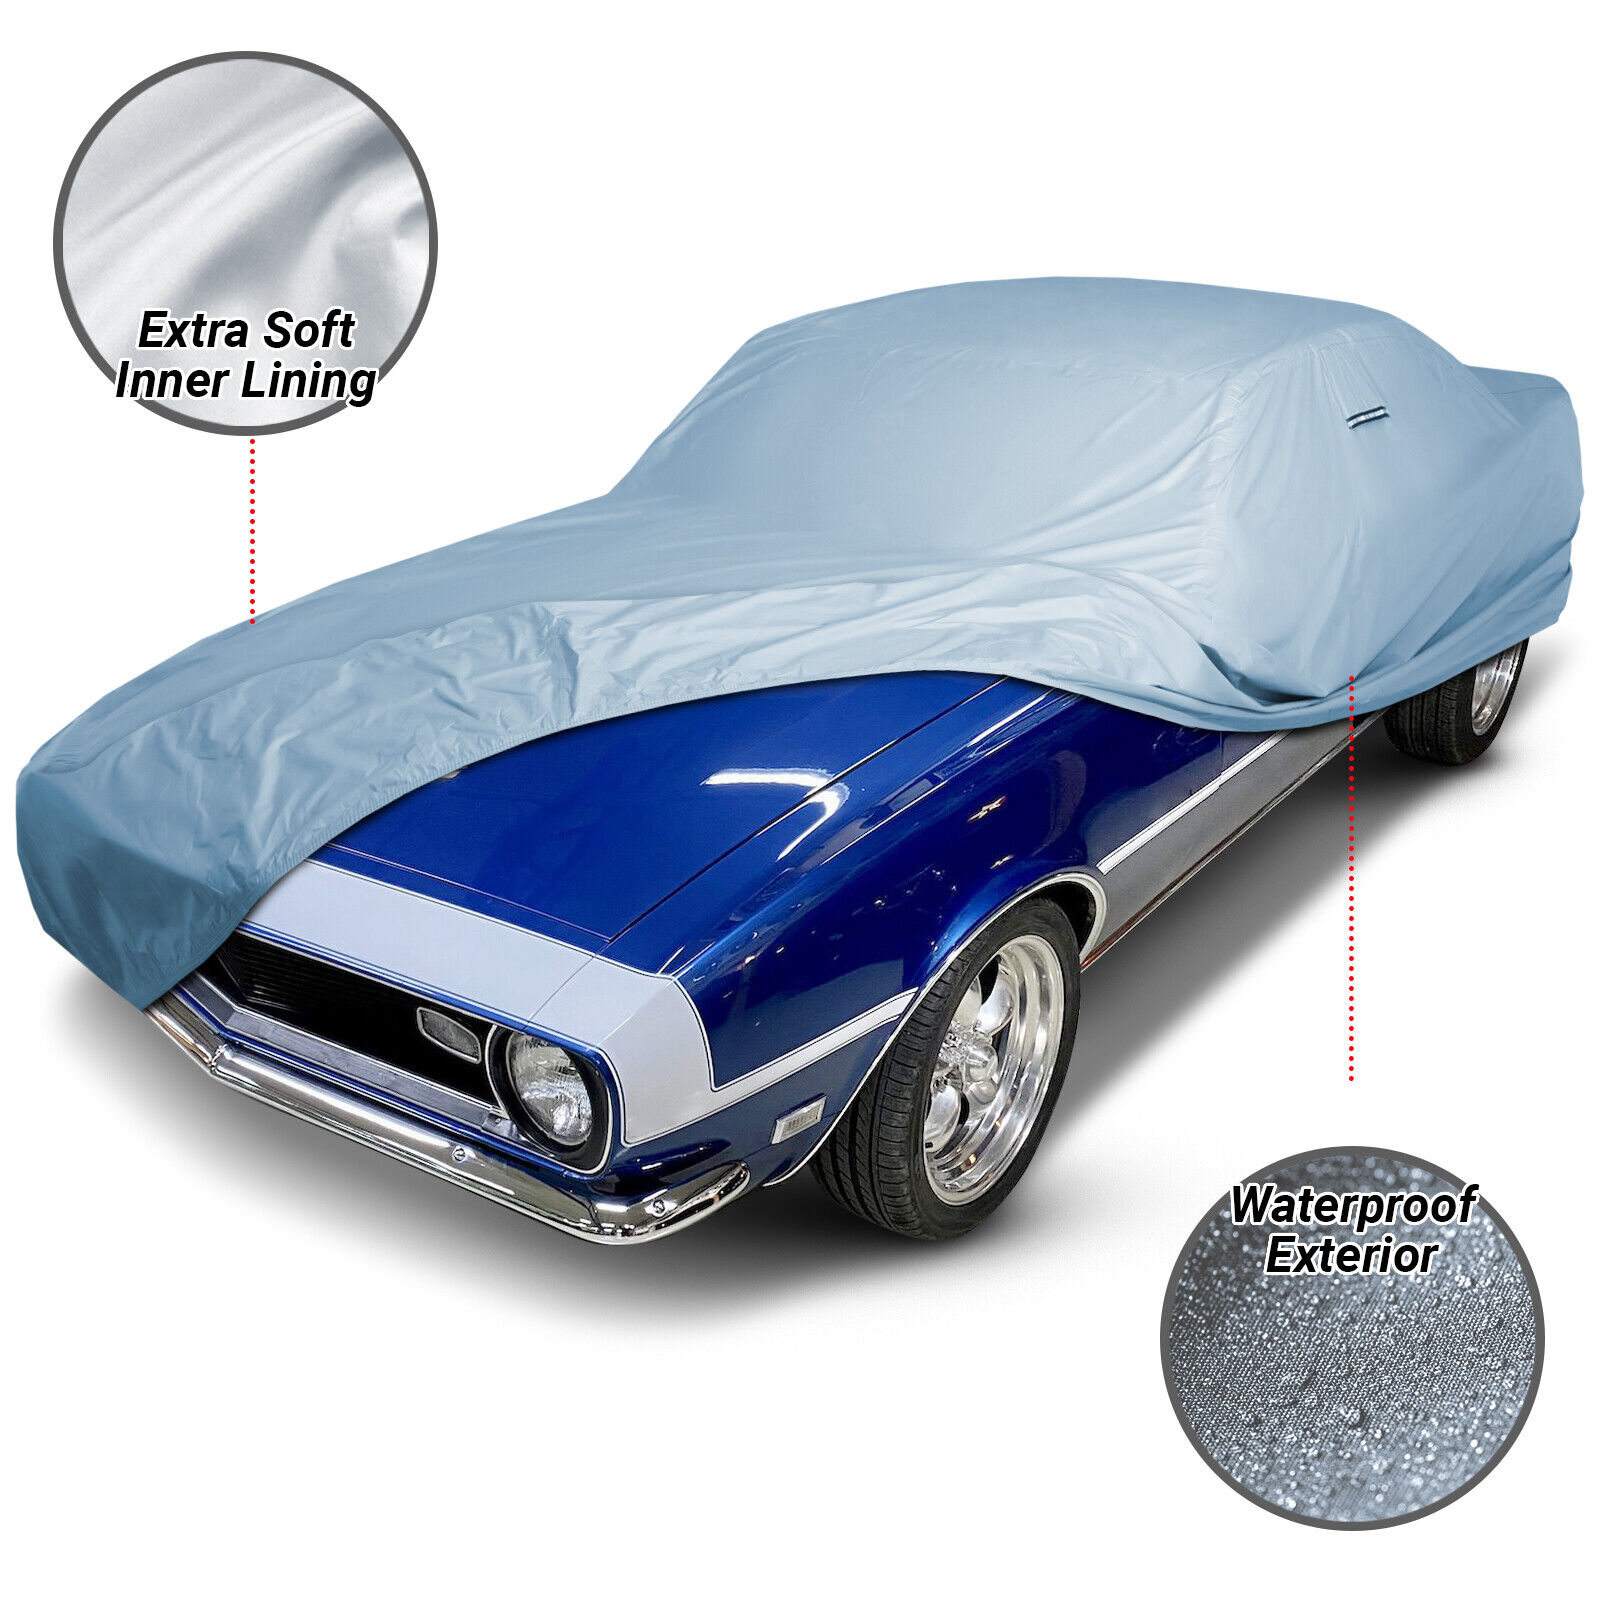 100% Waterproof / All Weather For [CHEVY CAMARO] Full Warranty Custom Car Cover